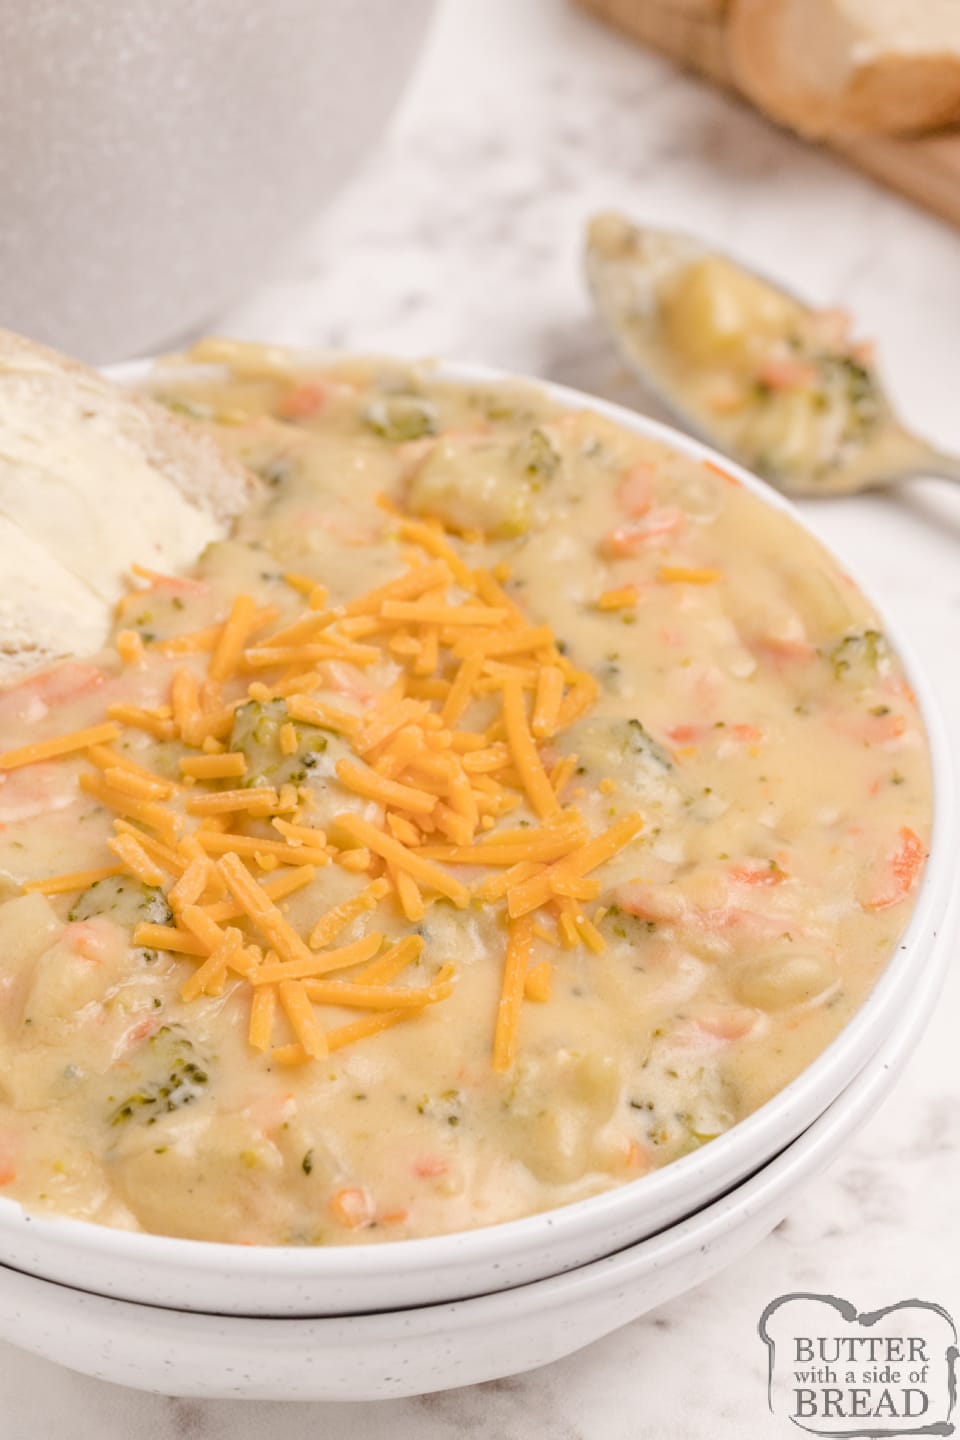 Cheesy Broccoli Potato Soup is creamy, filling and packed with veggies. Delicious potato soup recipe that is easy to prepare and makes for an easy weeknight meal the whole family will love.